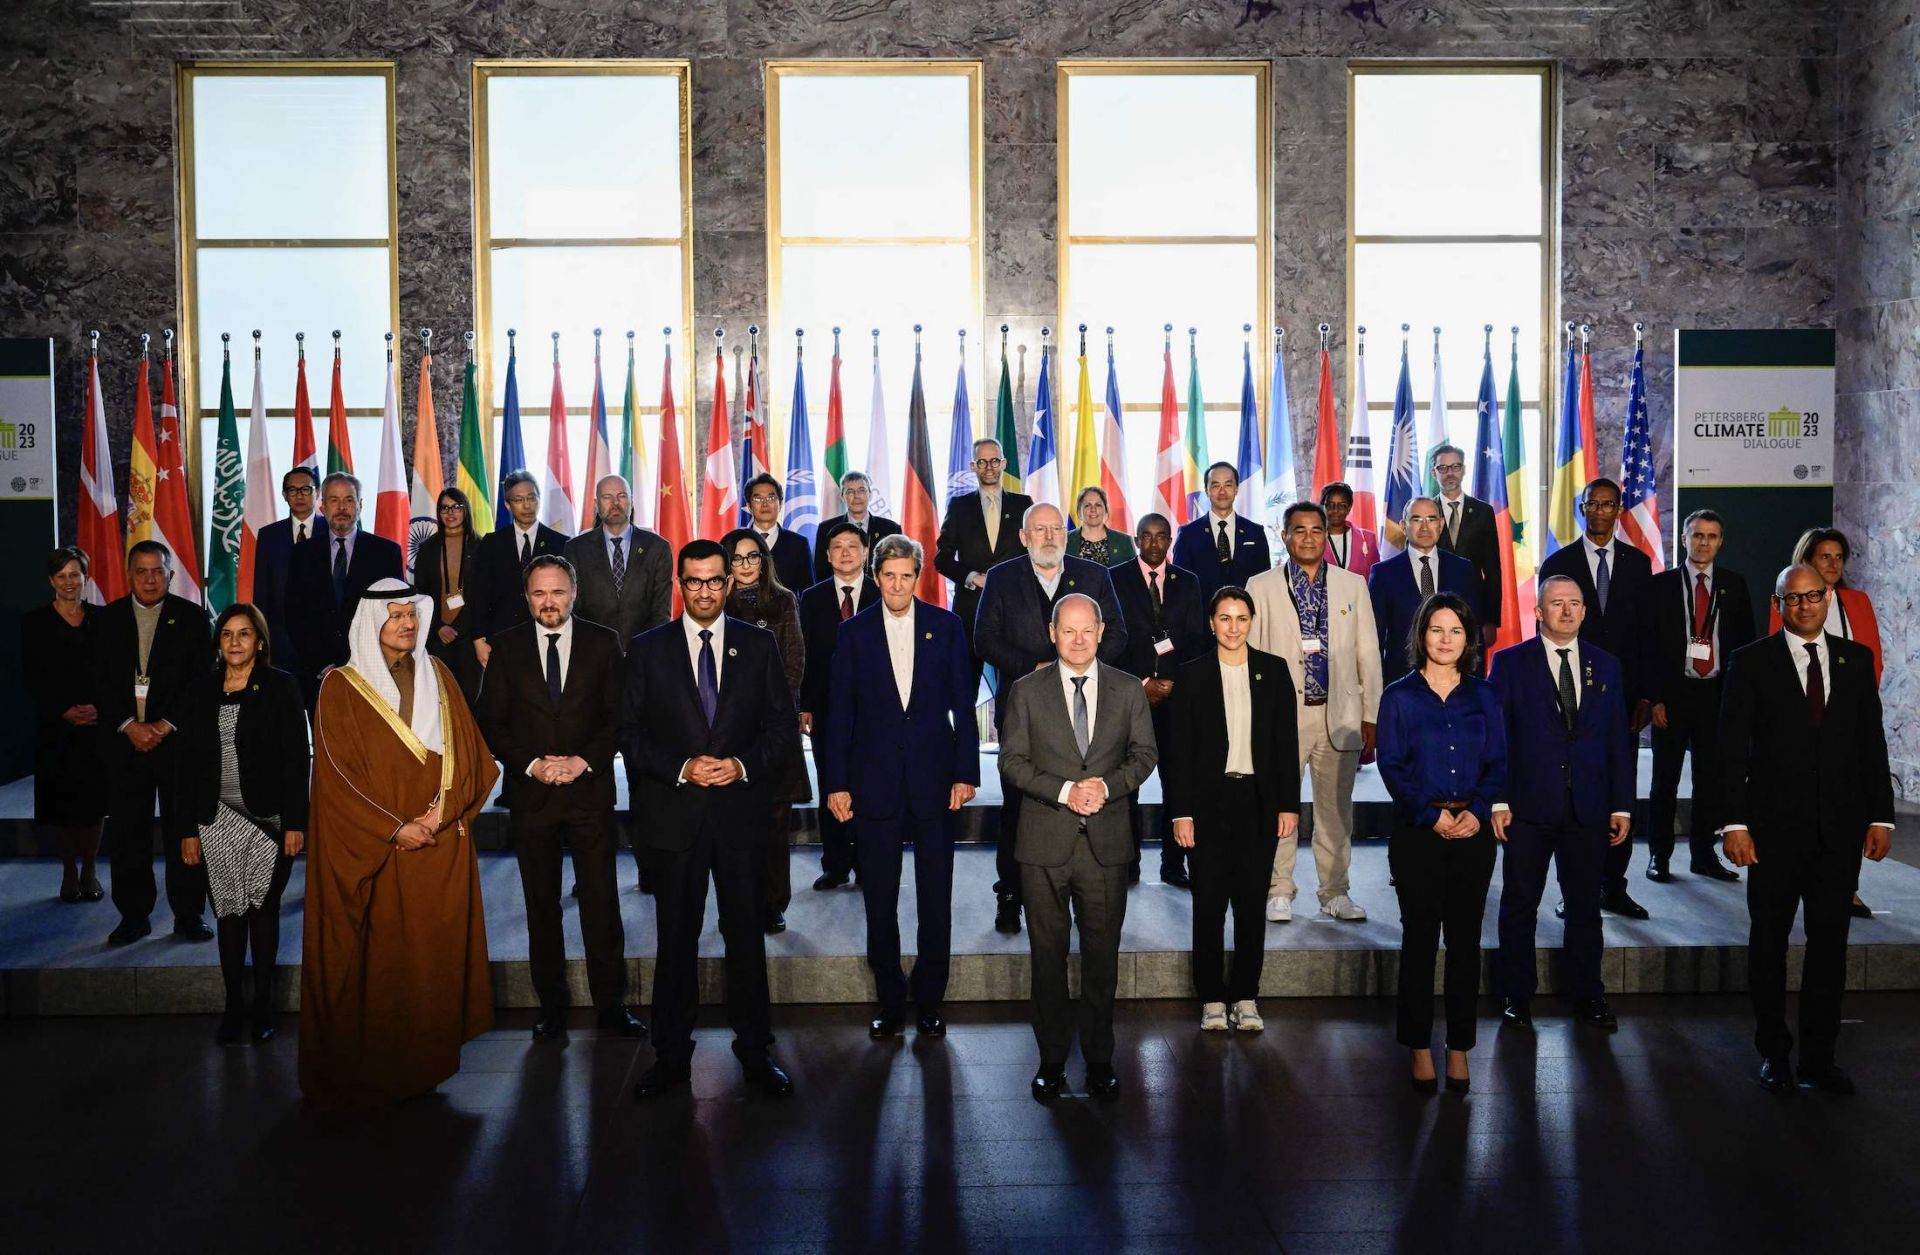 COP28 President-Designate and the UAE's Special Envoy for Climate Change, Sultan al-Jaber (front row, fourth from left) -- poses for a group photo along with U.S. Climate Envoy John Kerry, German Chancellor Olaf Scholz, German Foreign Minister Annalena Baerbock and other participants in the Petersberg Climate Dialogue on May 3, 2023, in Berlin, Germany.